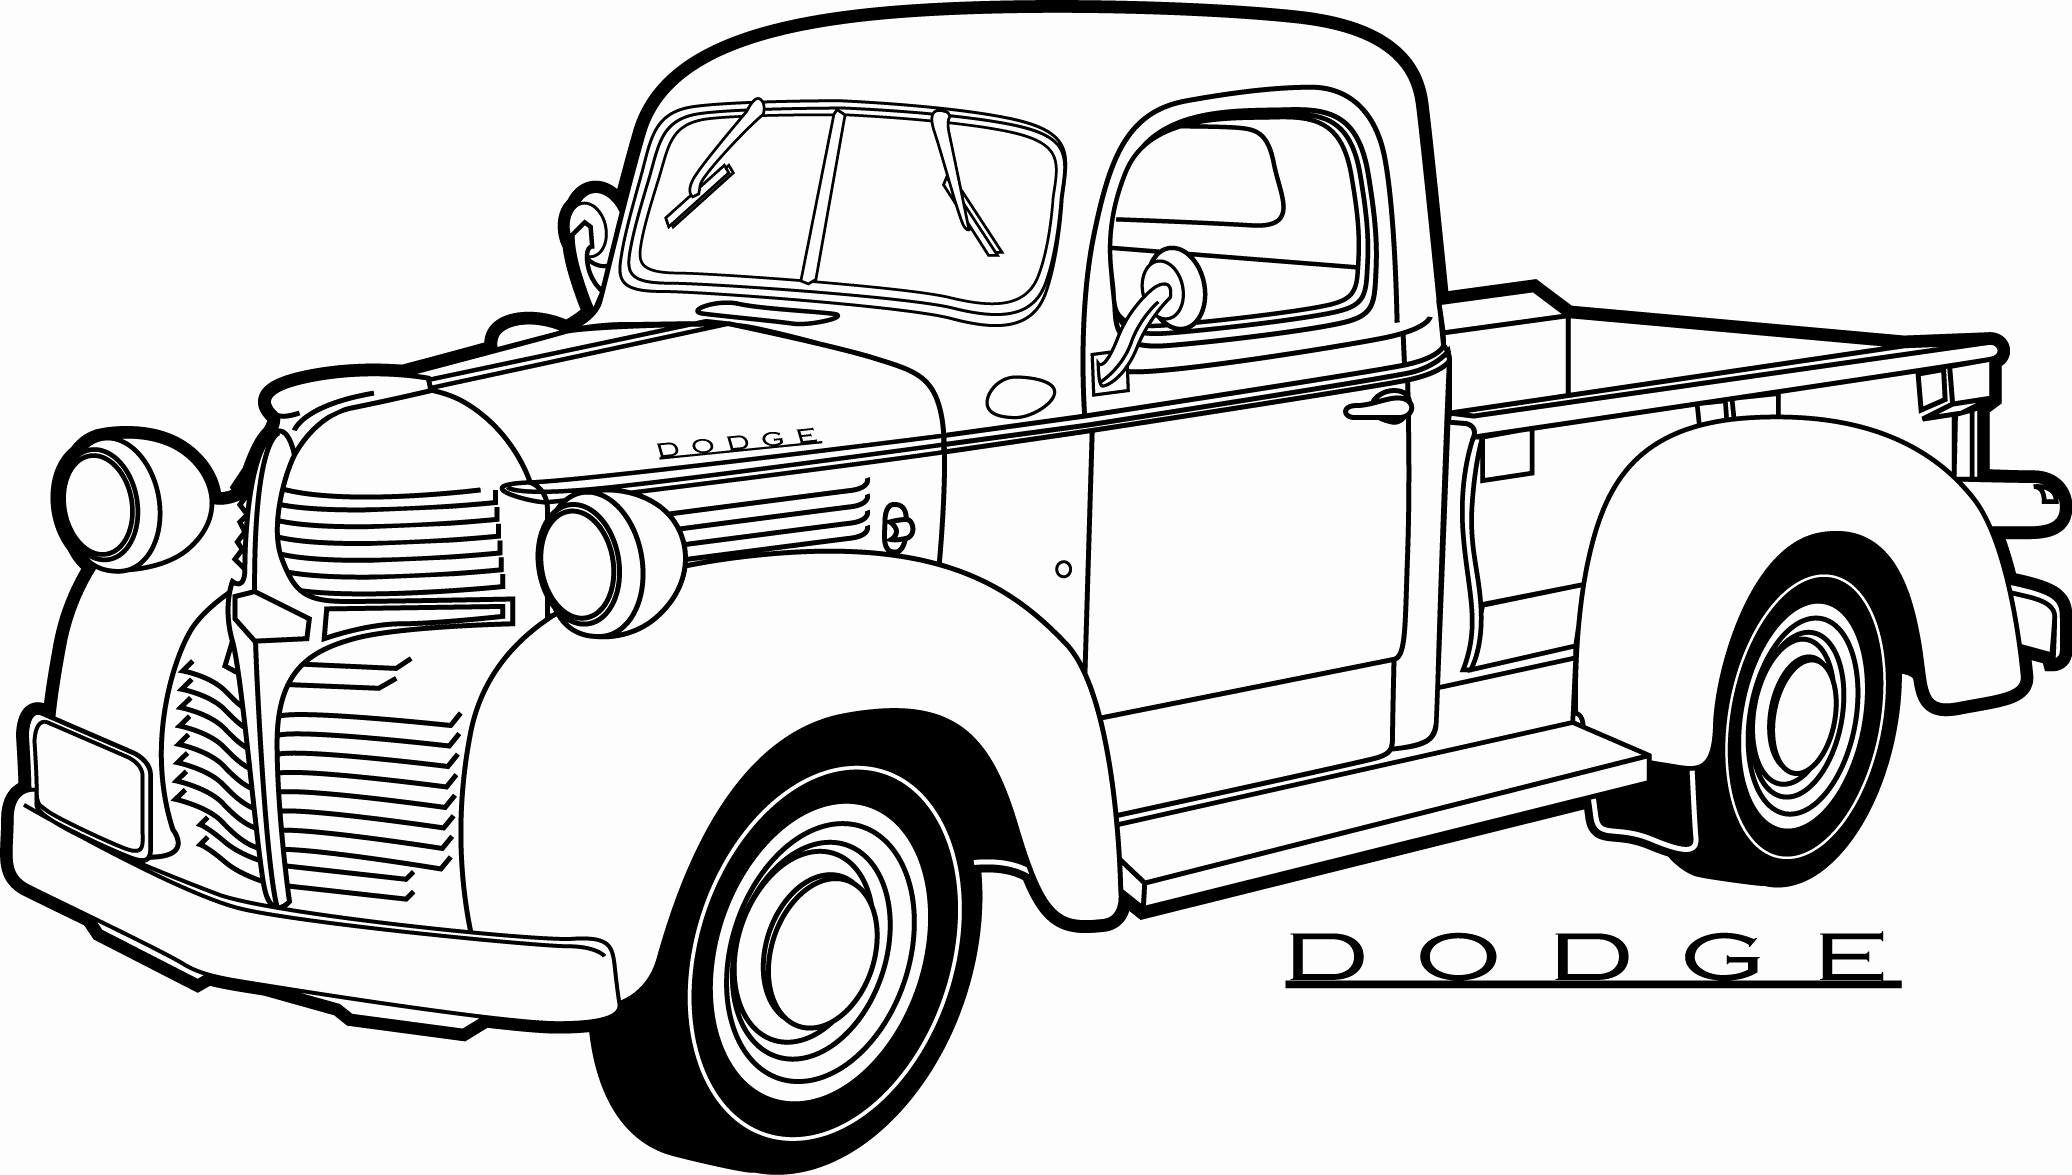 Dodge Truck Coloring Pages At GetColorings Free Printable 